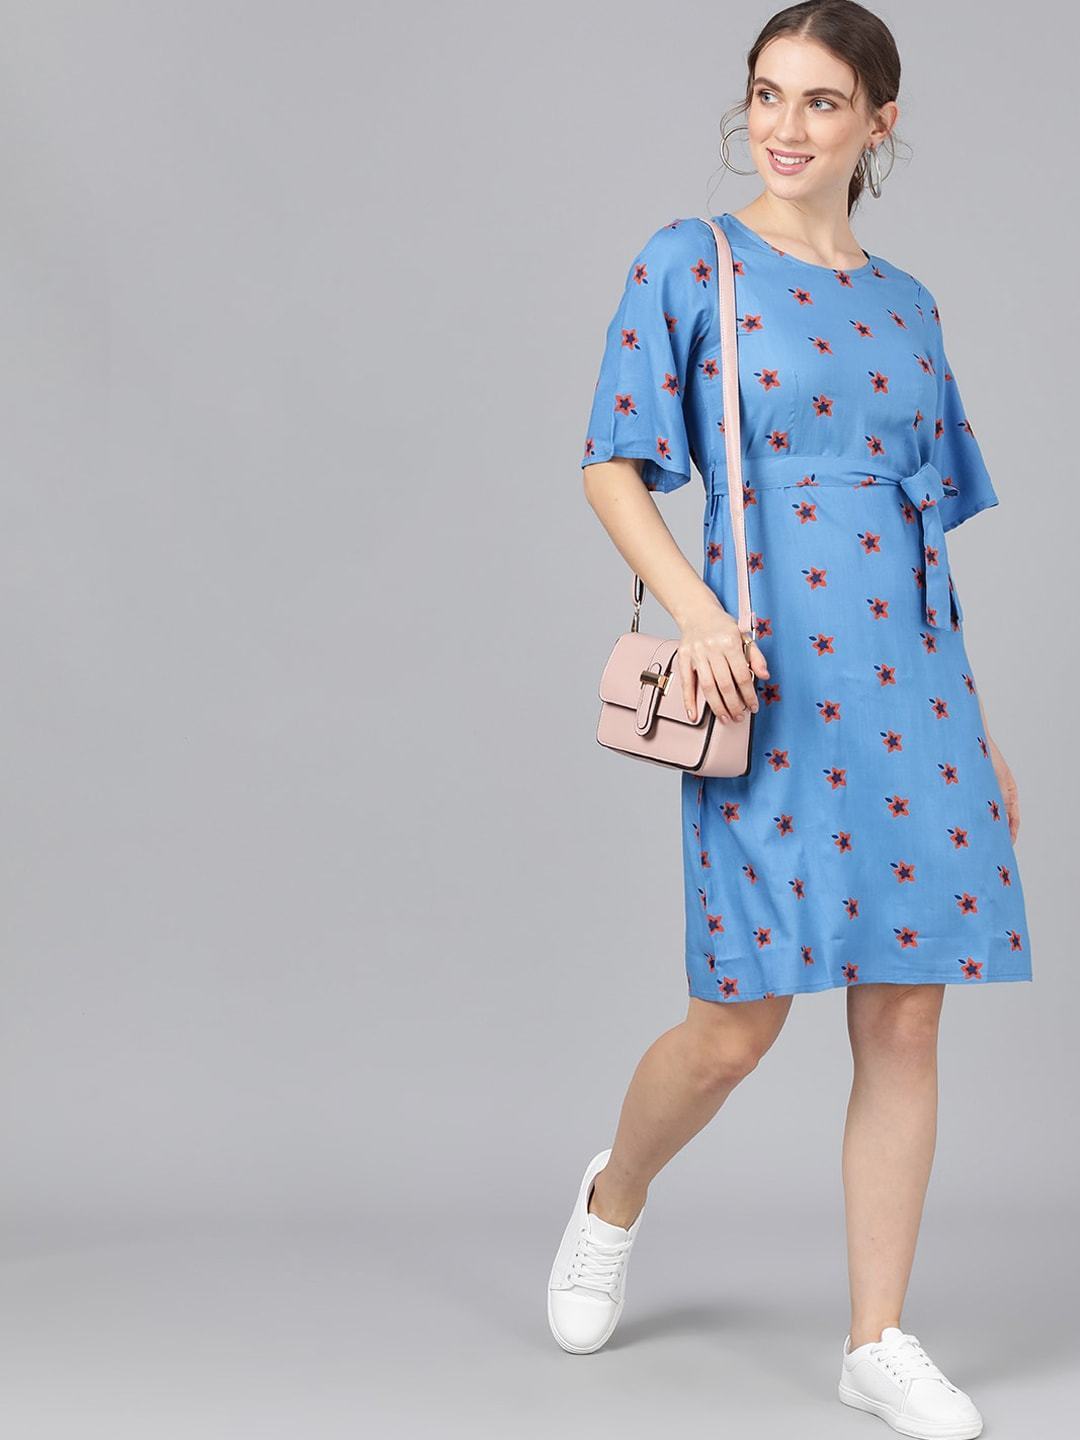 Women's  Blue & Maroon Printed Fit and Flare Dress - AKS